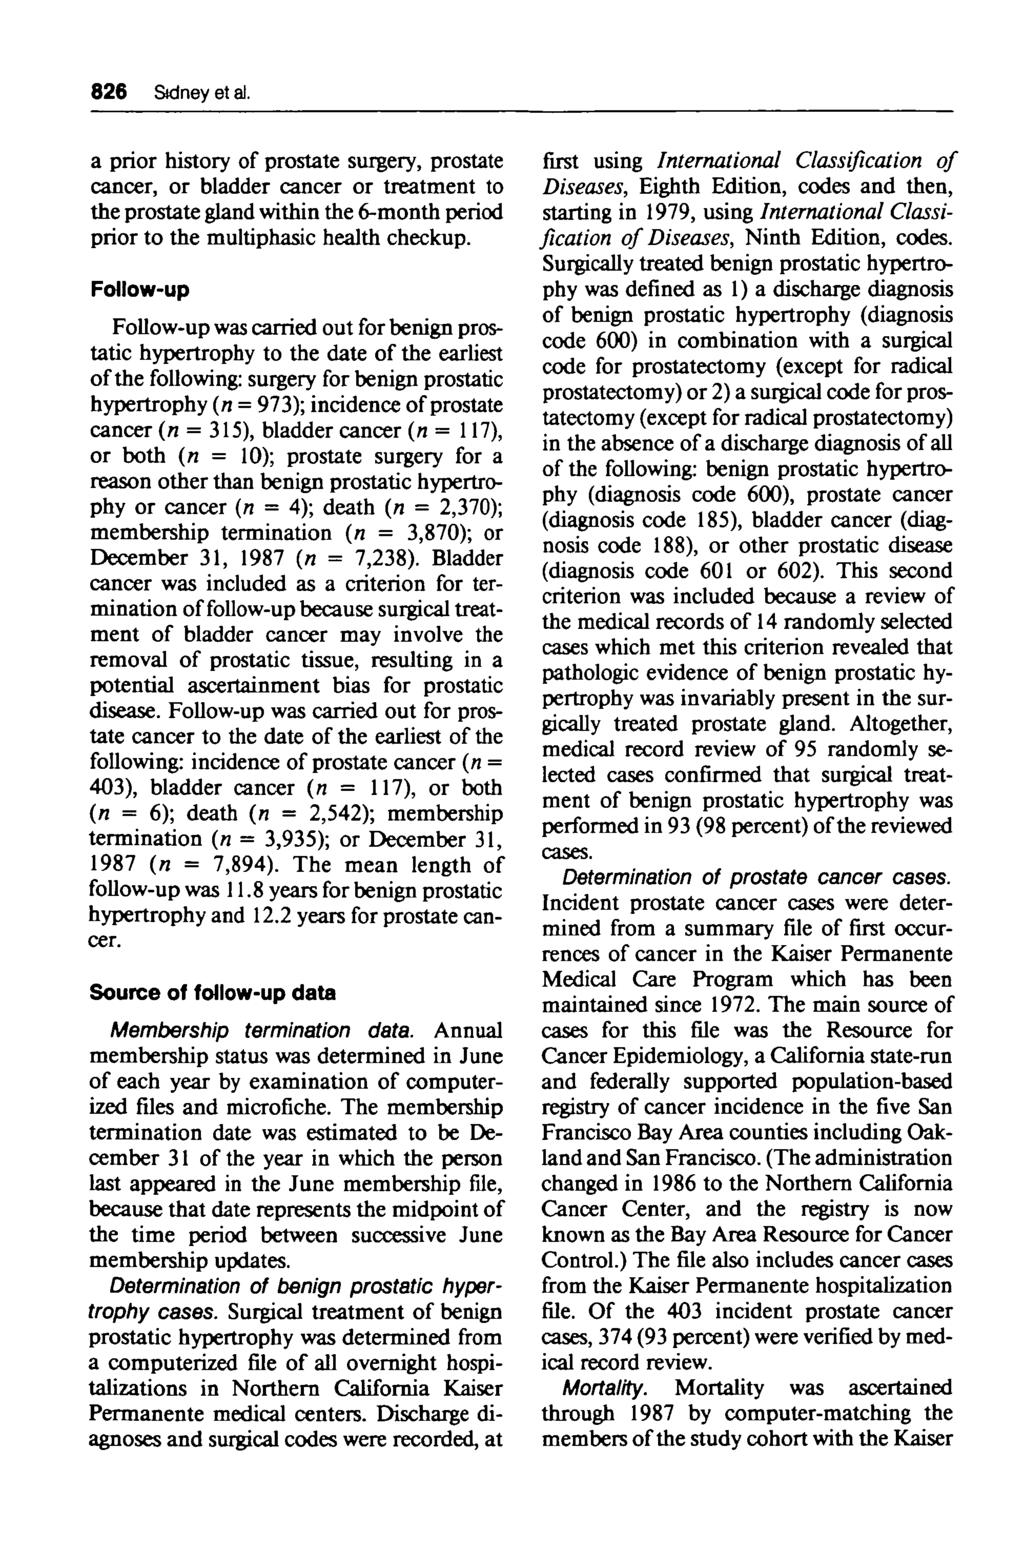 826 Sidney et al. a prior history of prostate surgery, prostate cancer, or bladder cancer or treatment to the prostate gland within the 6-month period prior to the multiphasic health checkup.